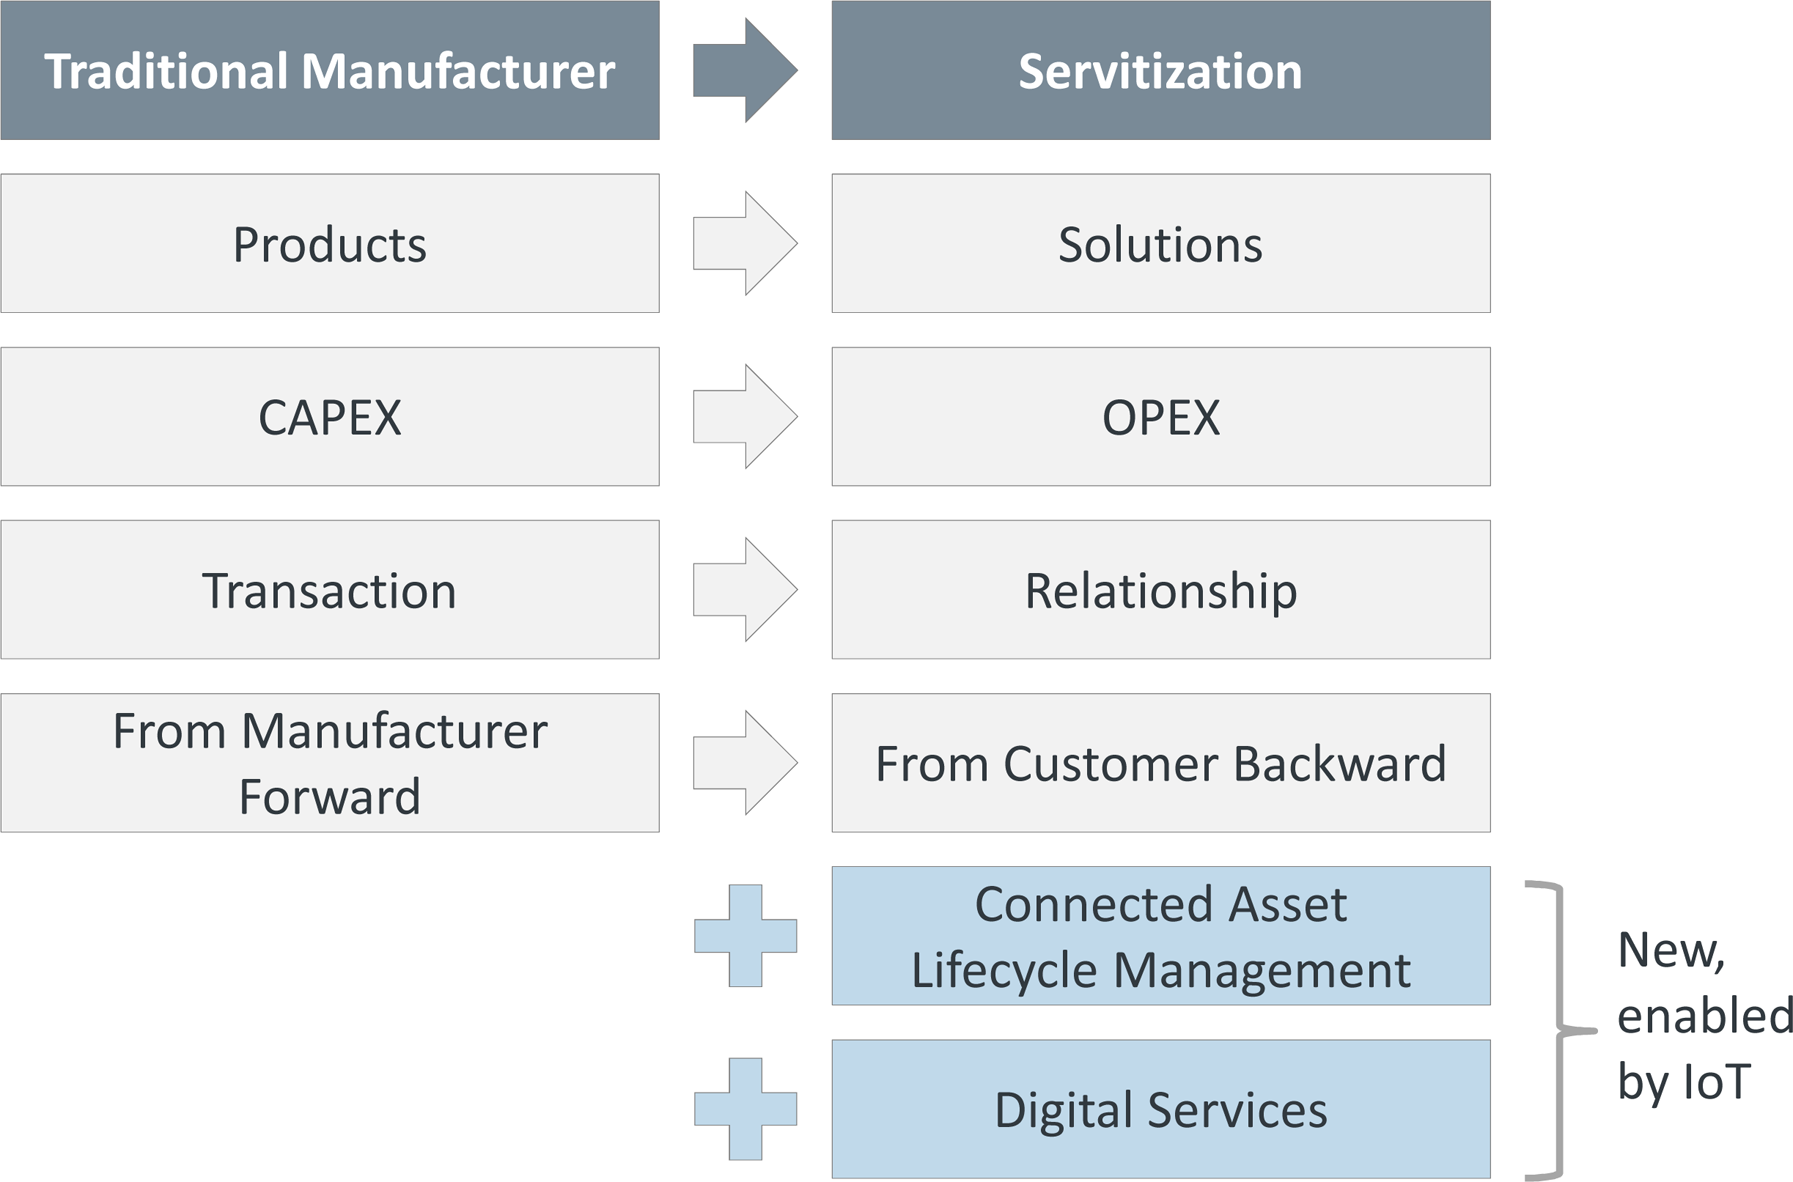 Servitization and IoT